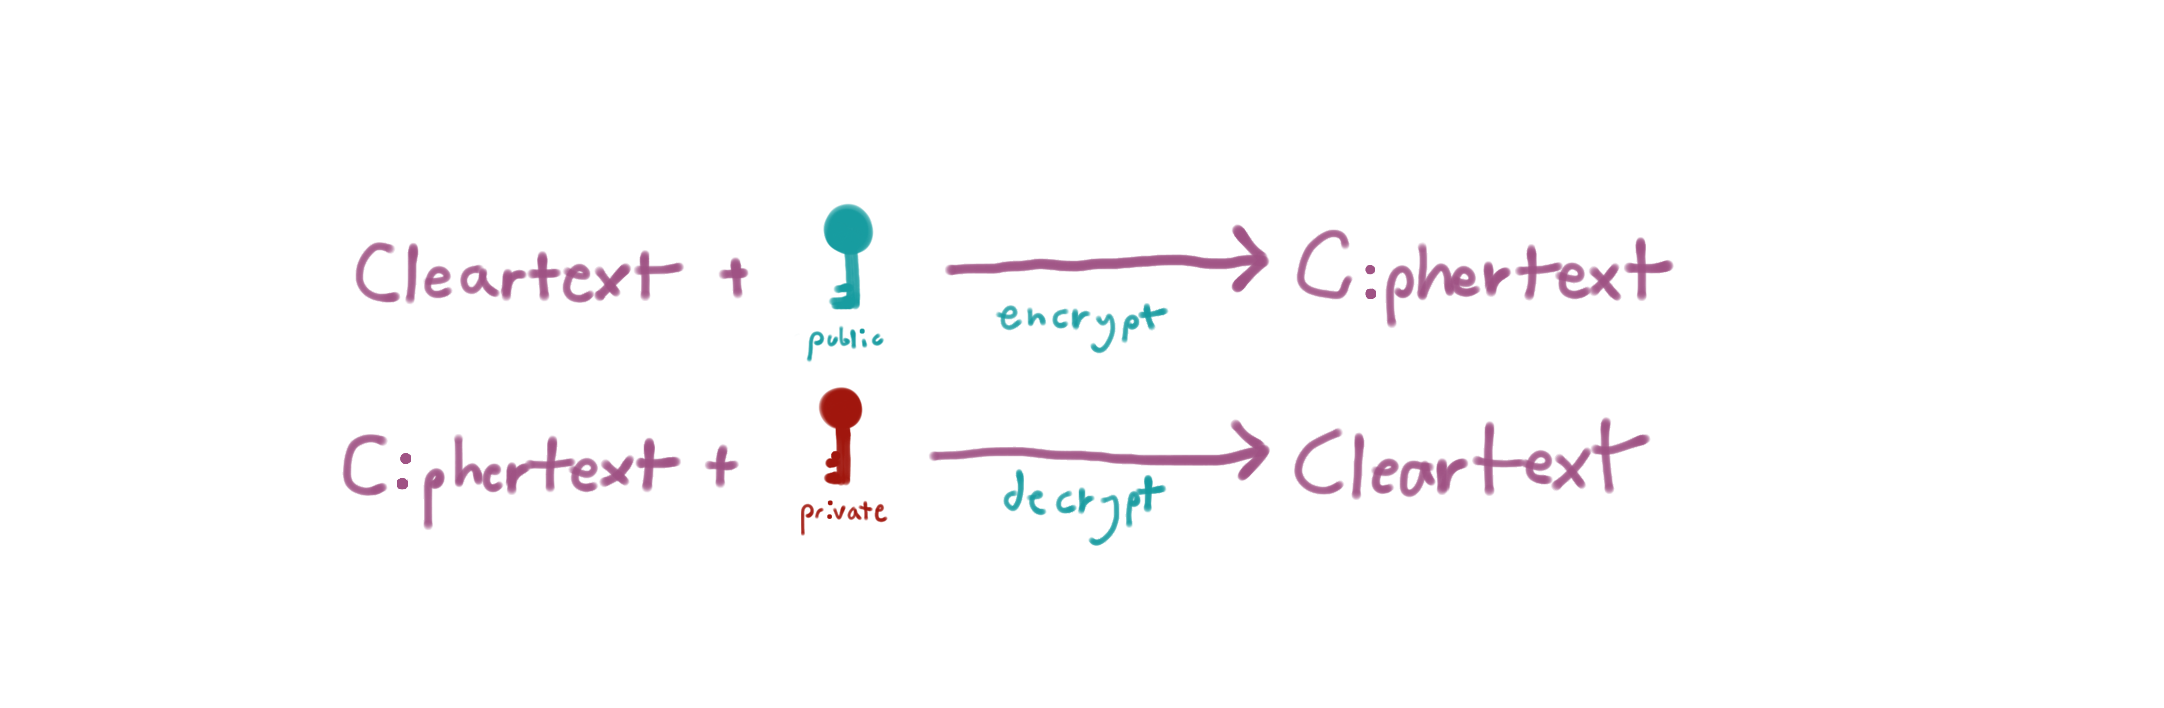 Illustration of using a public key to encrypt and a private key to decrypt